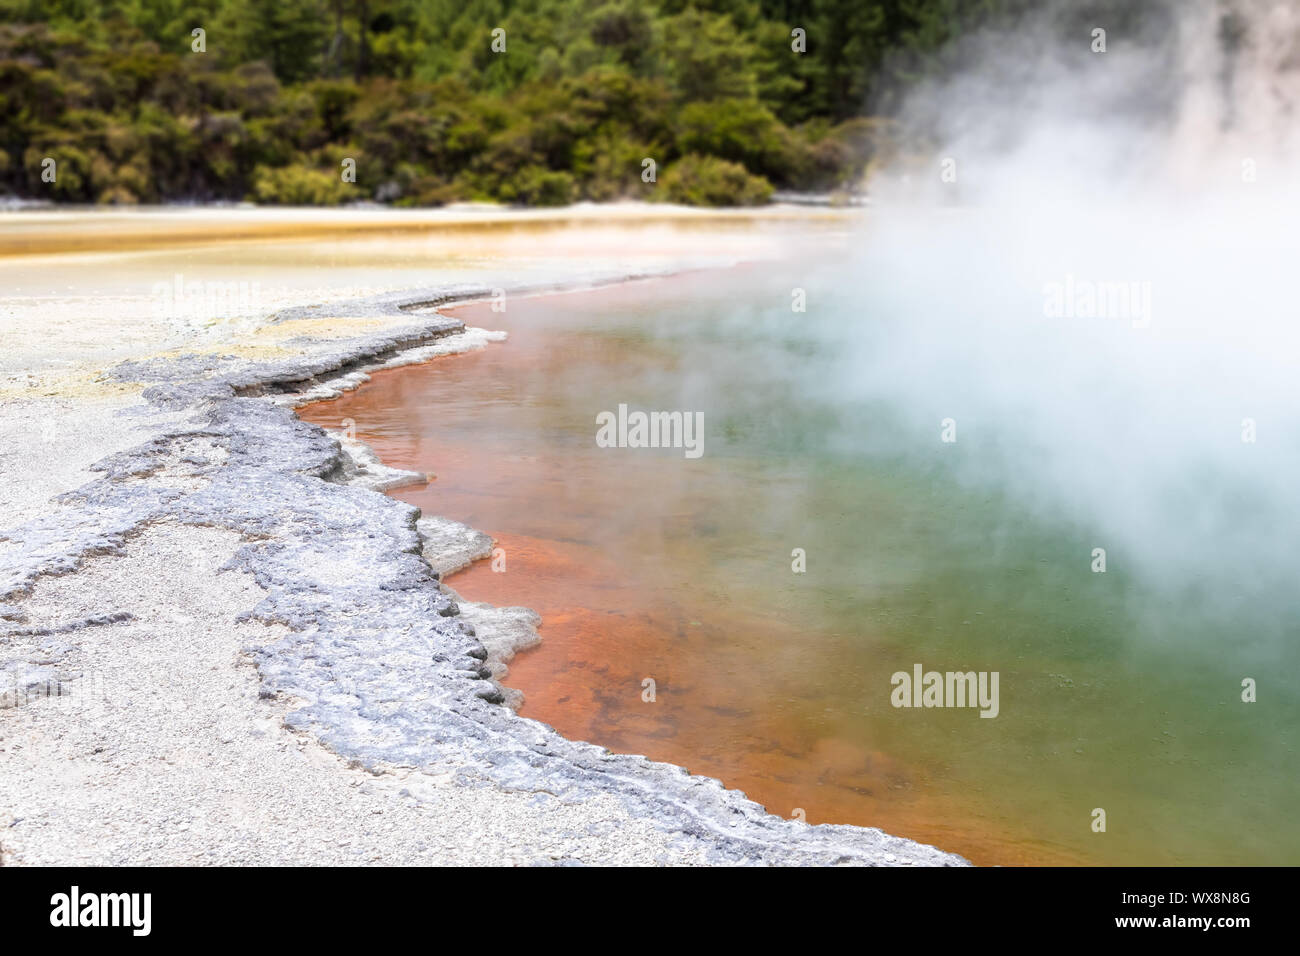 hot sparkling lake in New Zealand Stock Photo